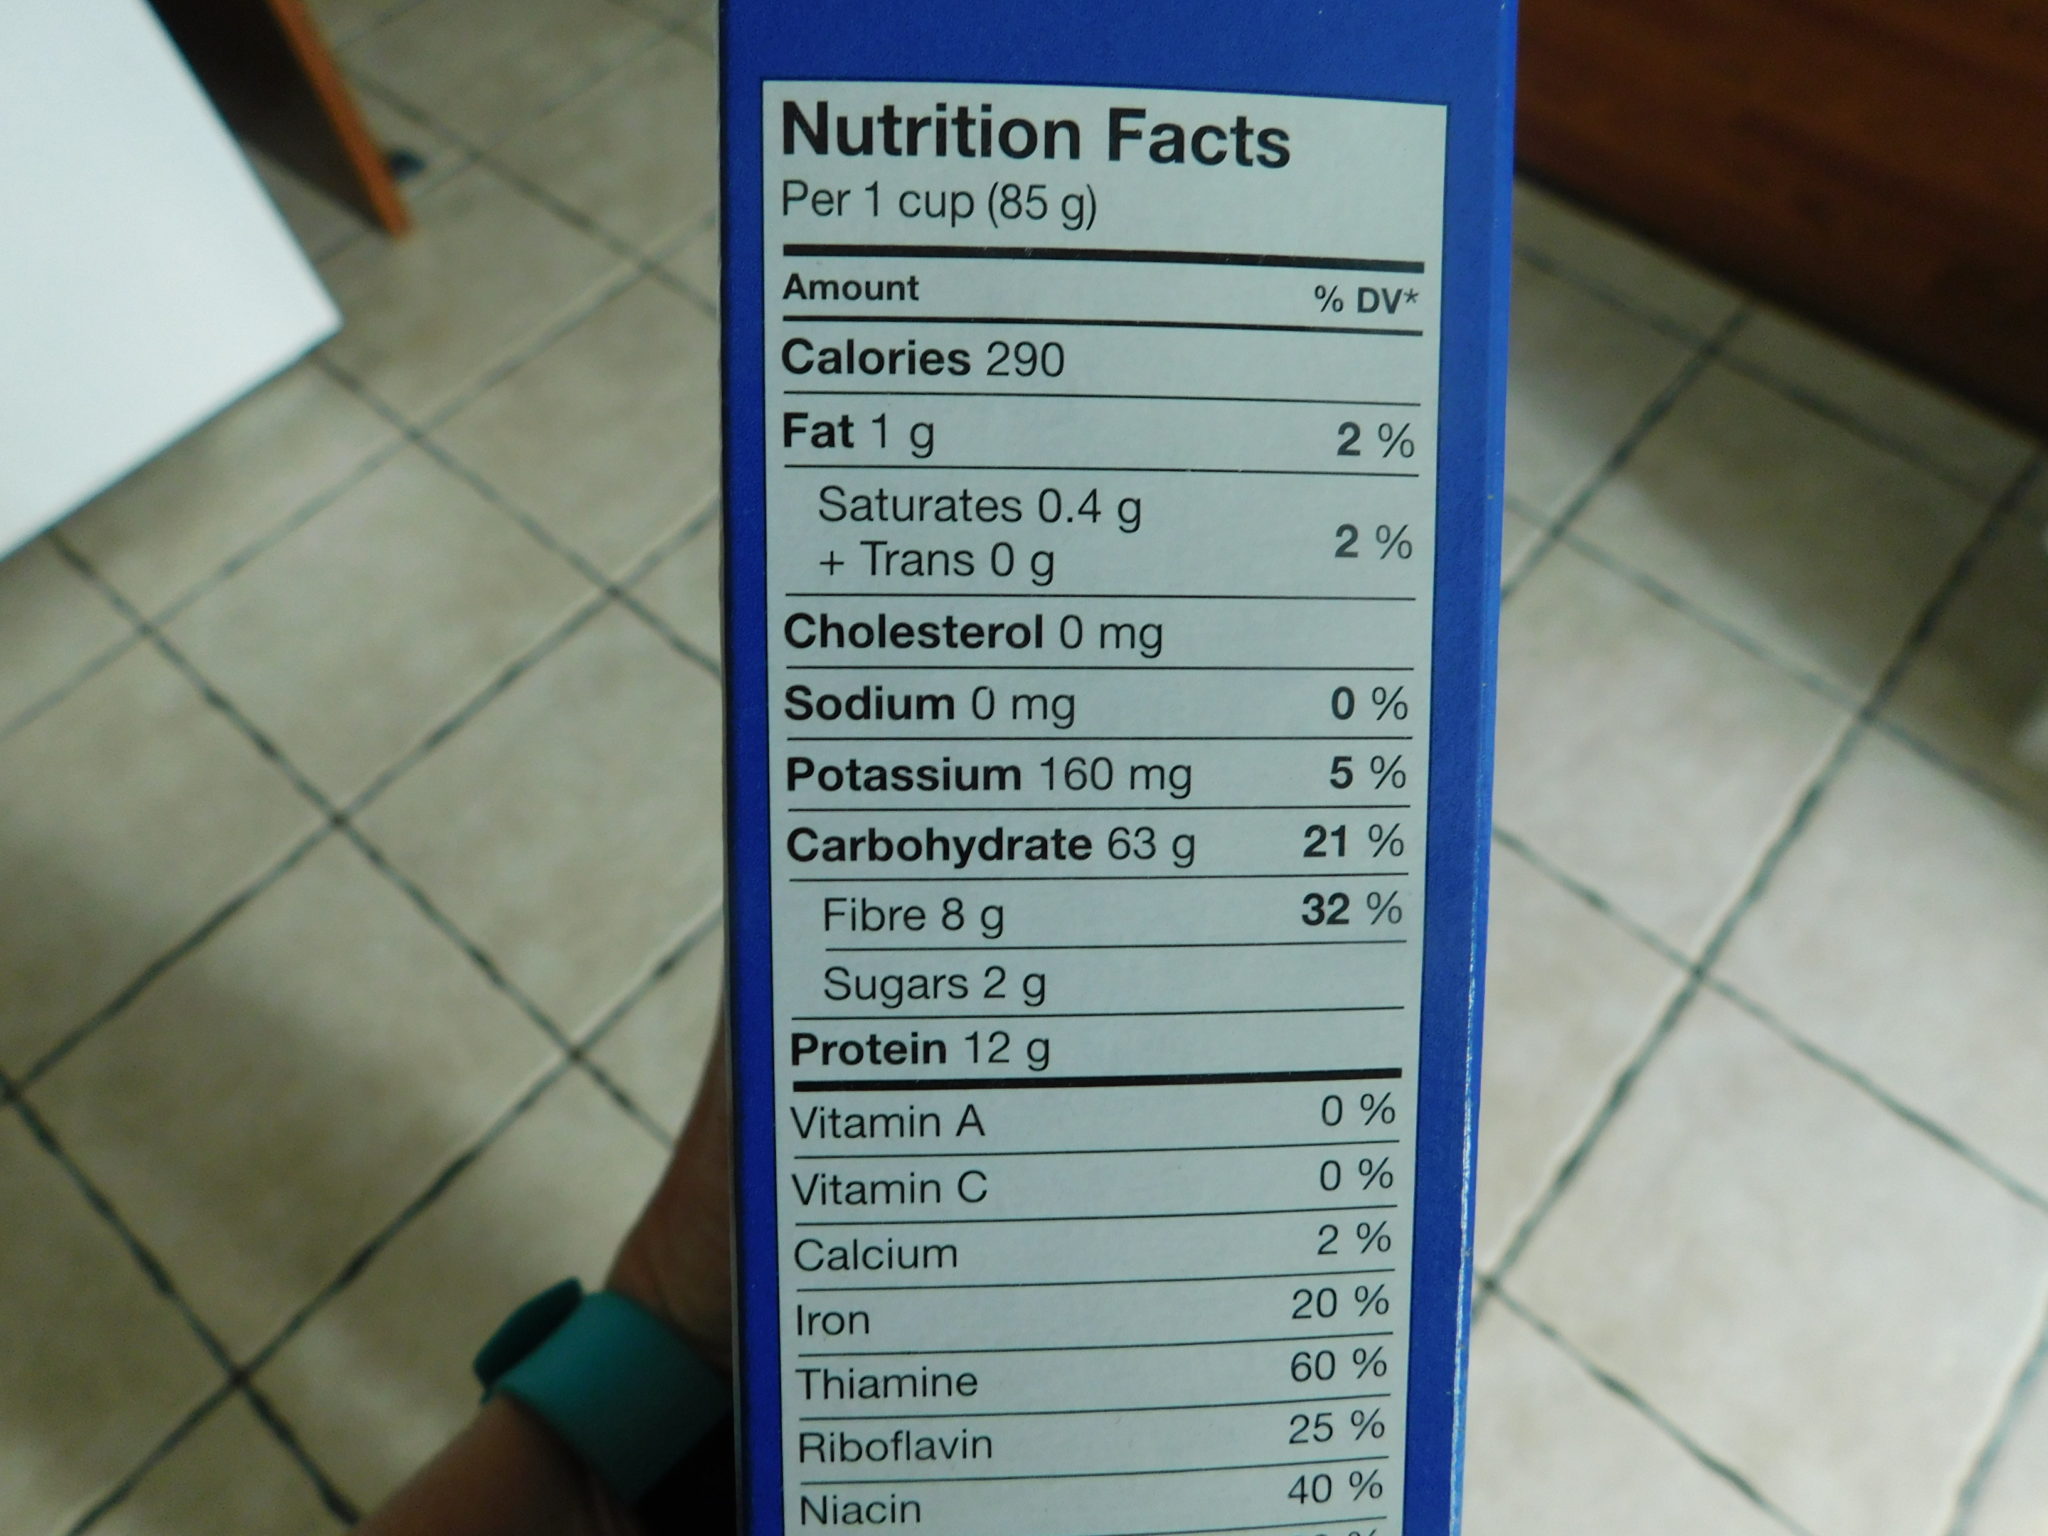 Nutrition info for box of rotini pasta, 290 calories, 1g fat, 160mg potassium, 63g carbohydrate, 12g protein 